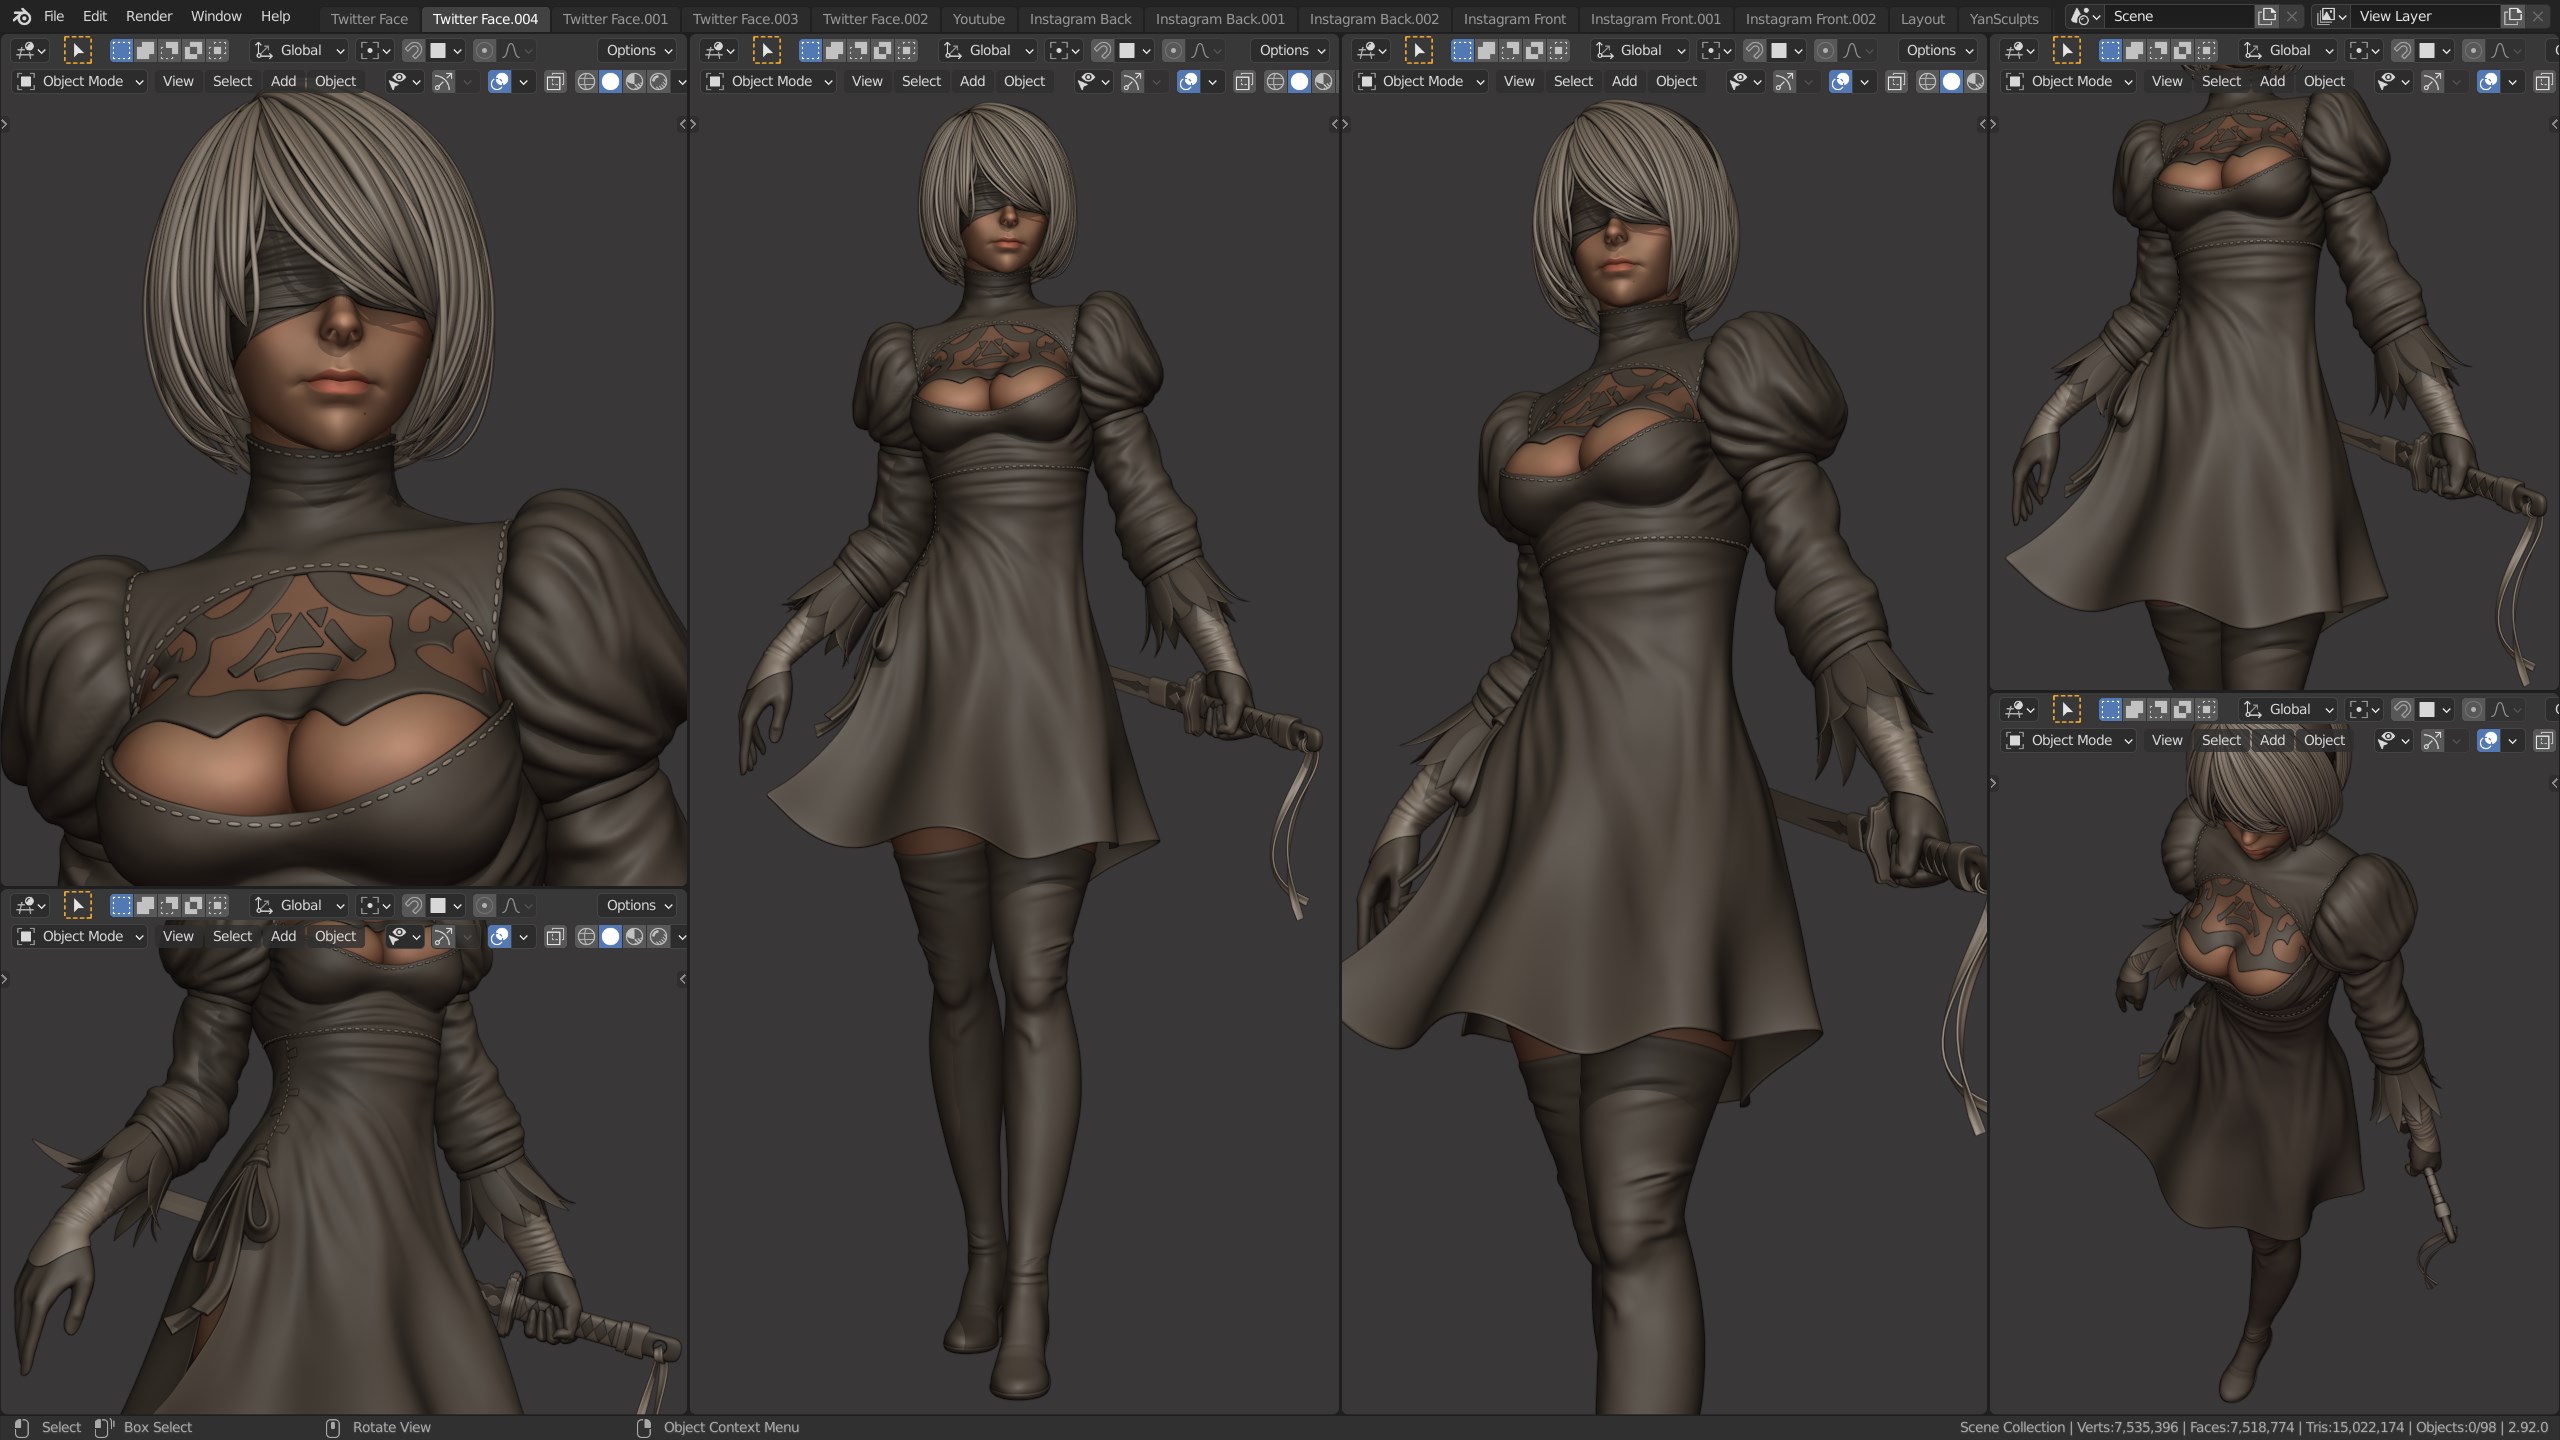 2B NieR Automata - Finished Projects - Blender Artists Community